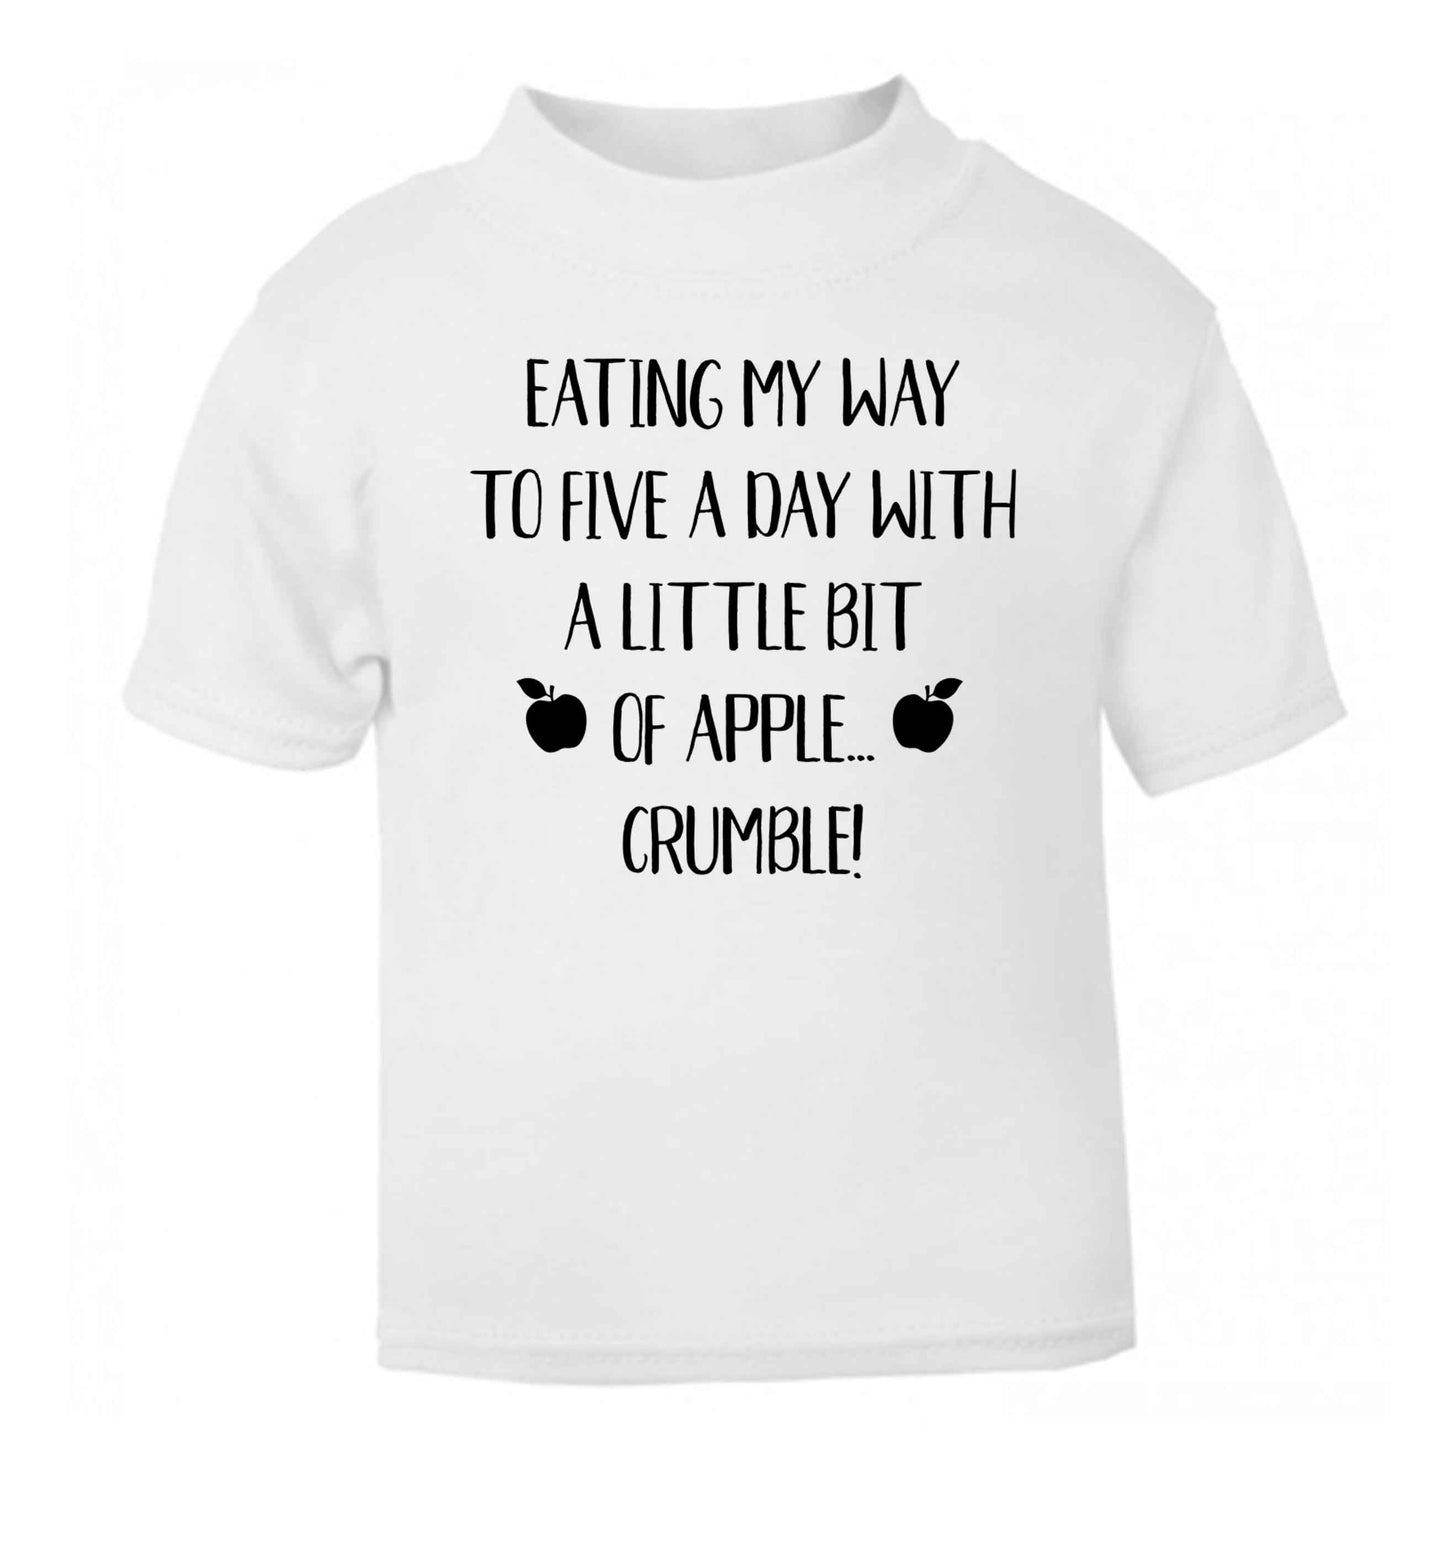 Eating my way to five a day with a little bit of apple crumble white Baby Toddler Tshirt 2 Years